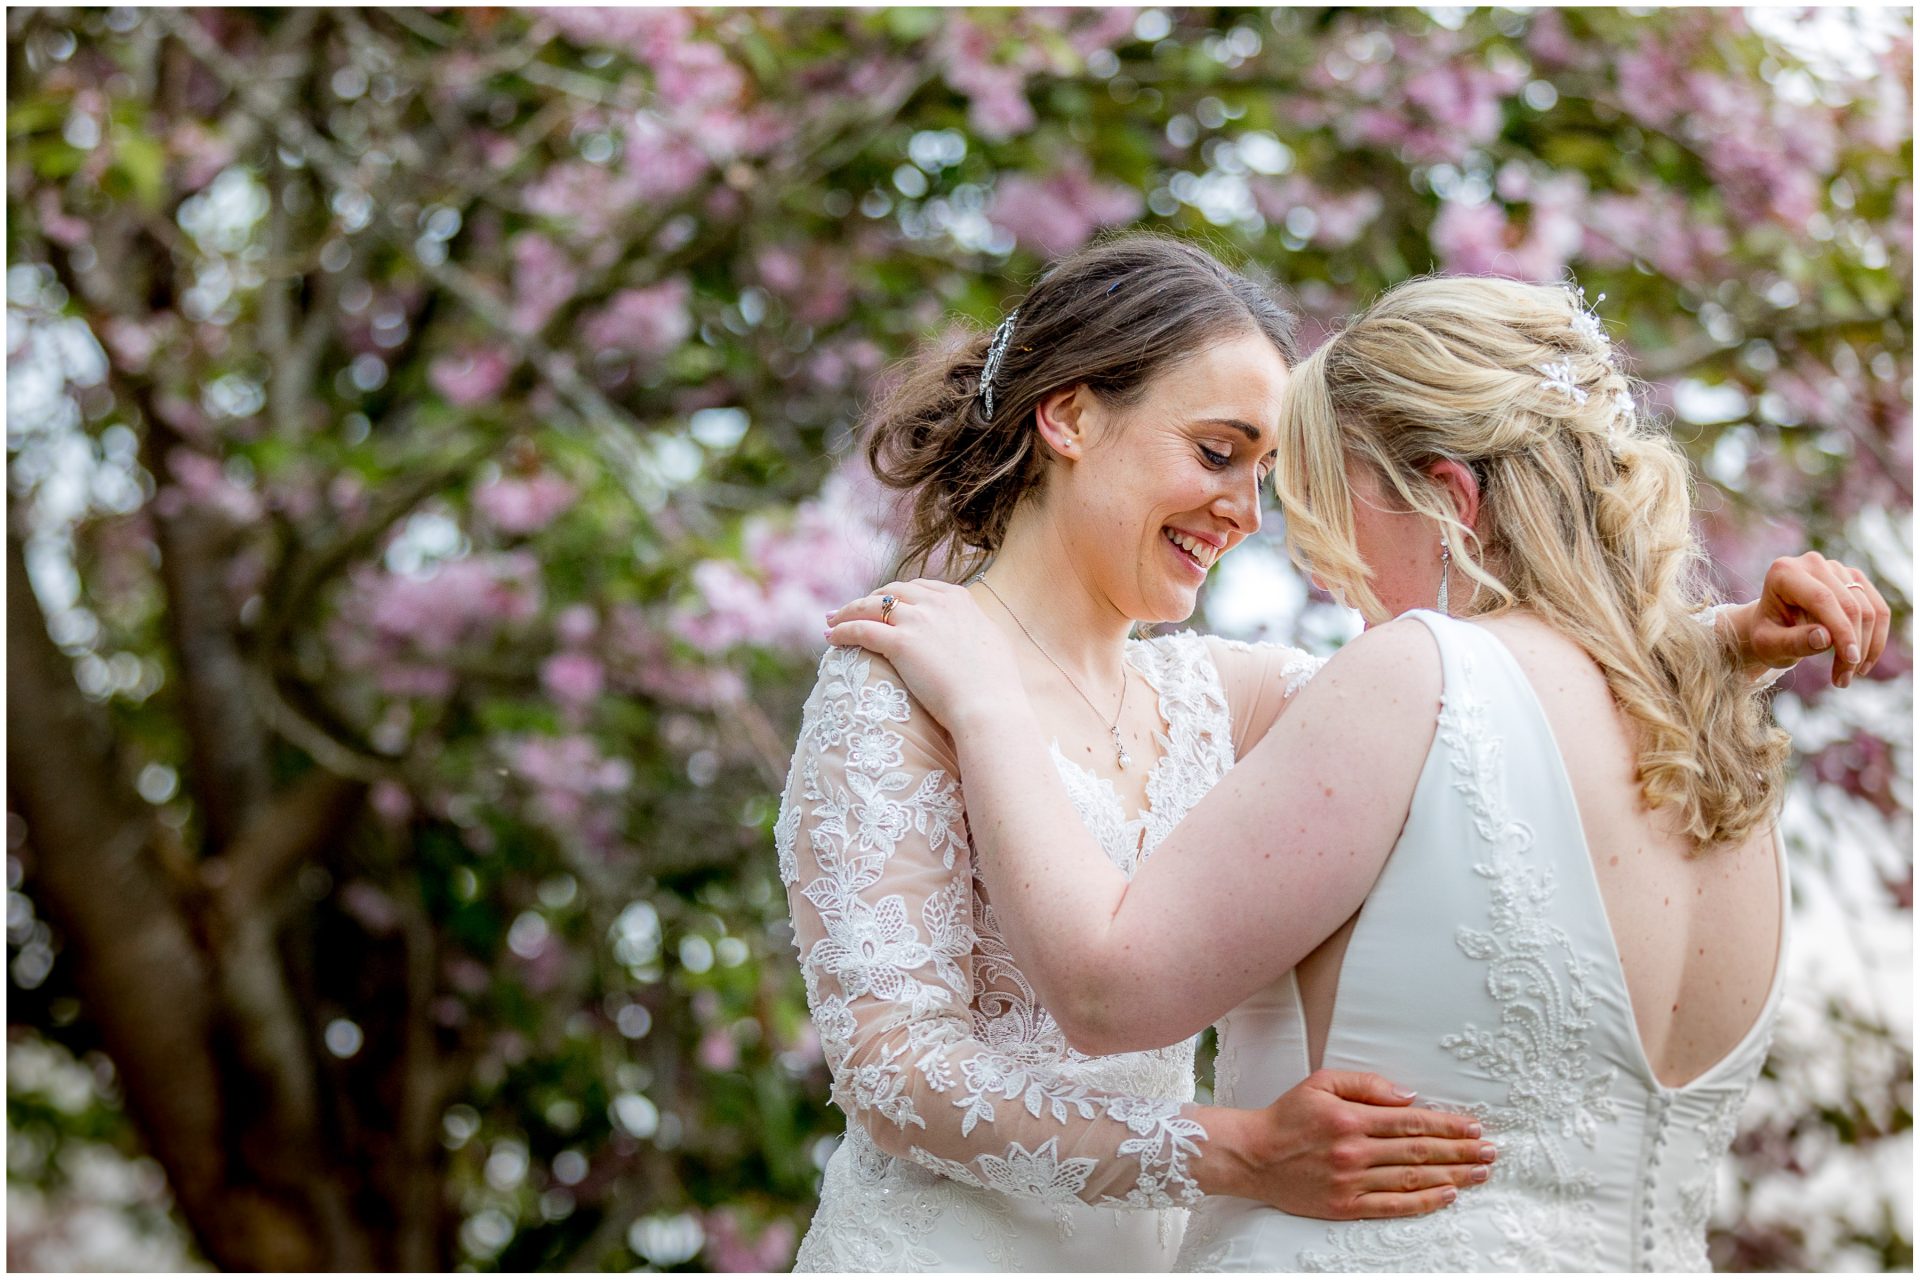 Same sex bride portrait in front of blossom tree at Hampshire wedding venue in the Spring